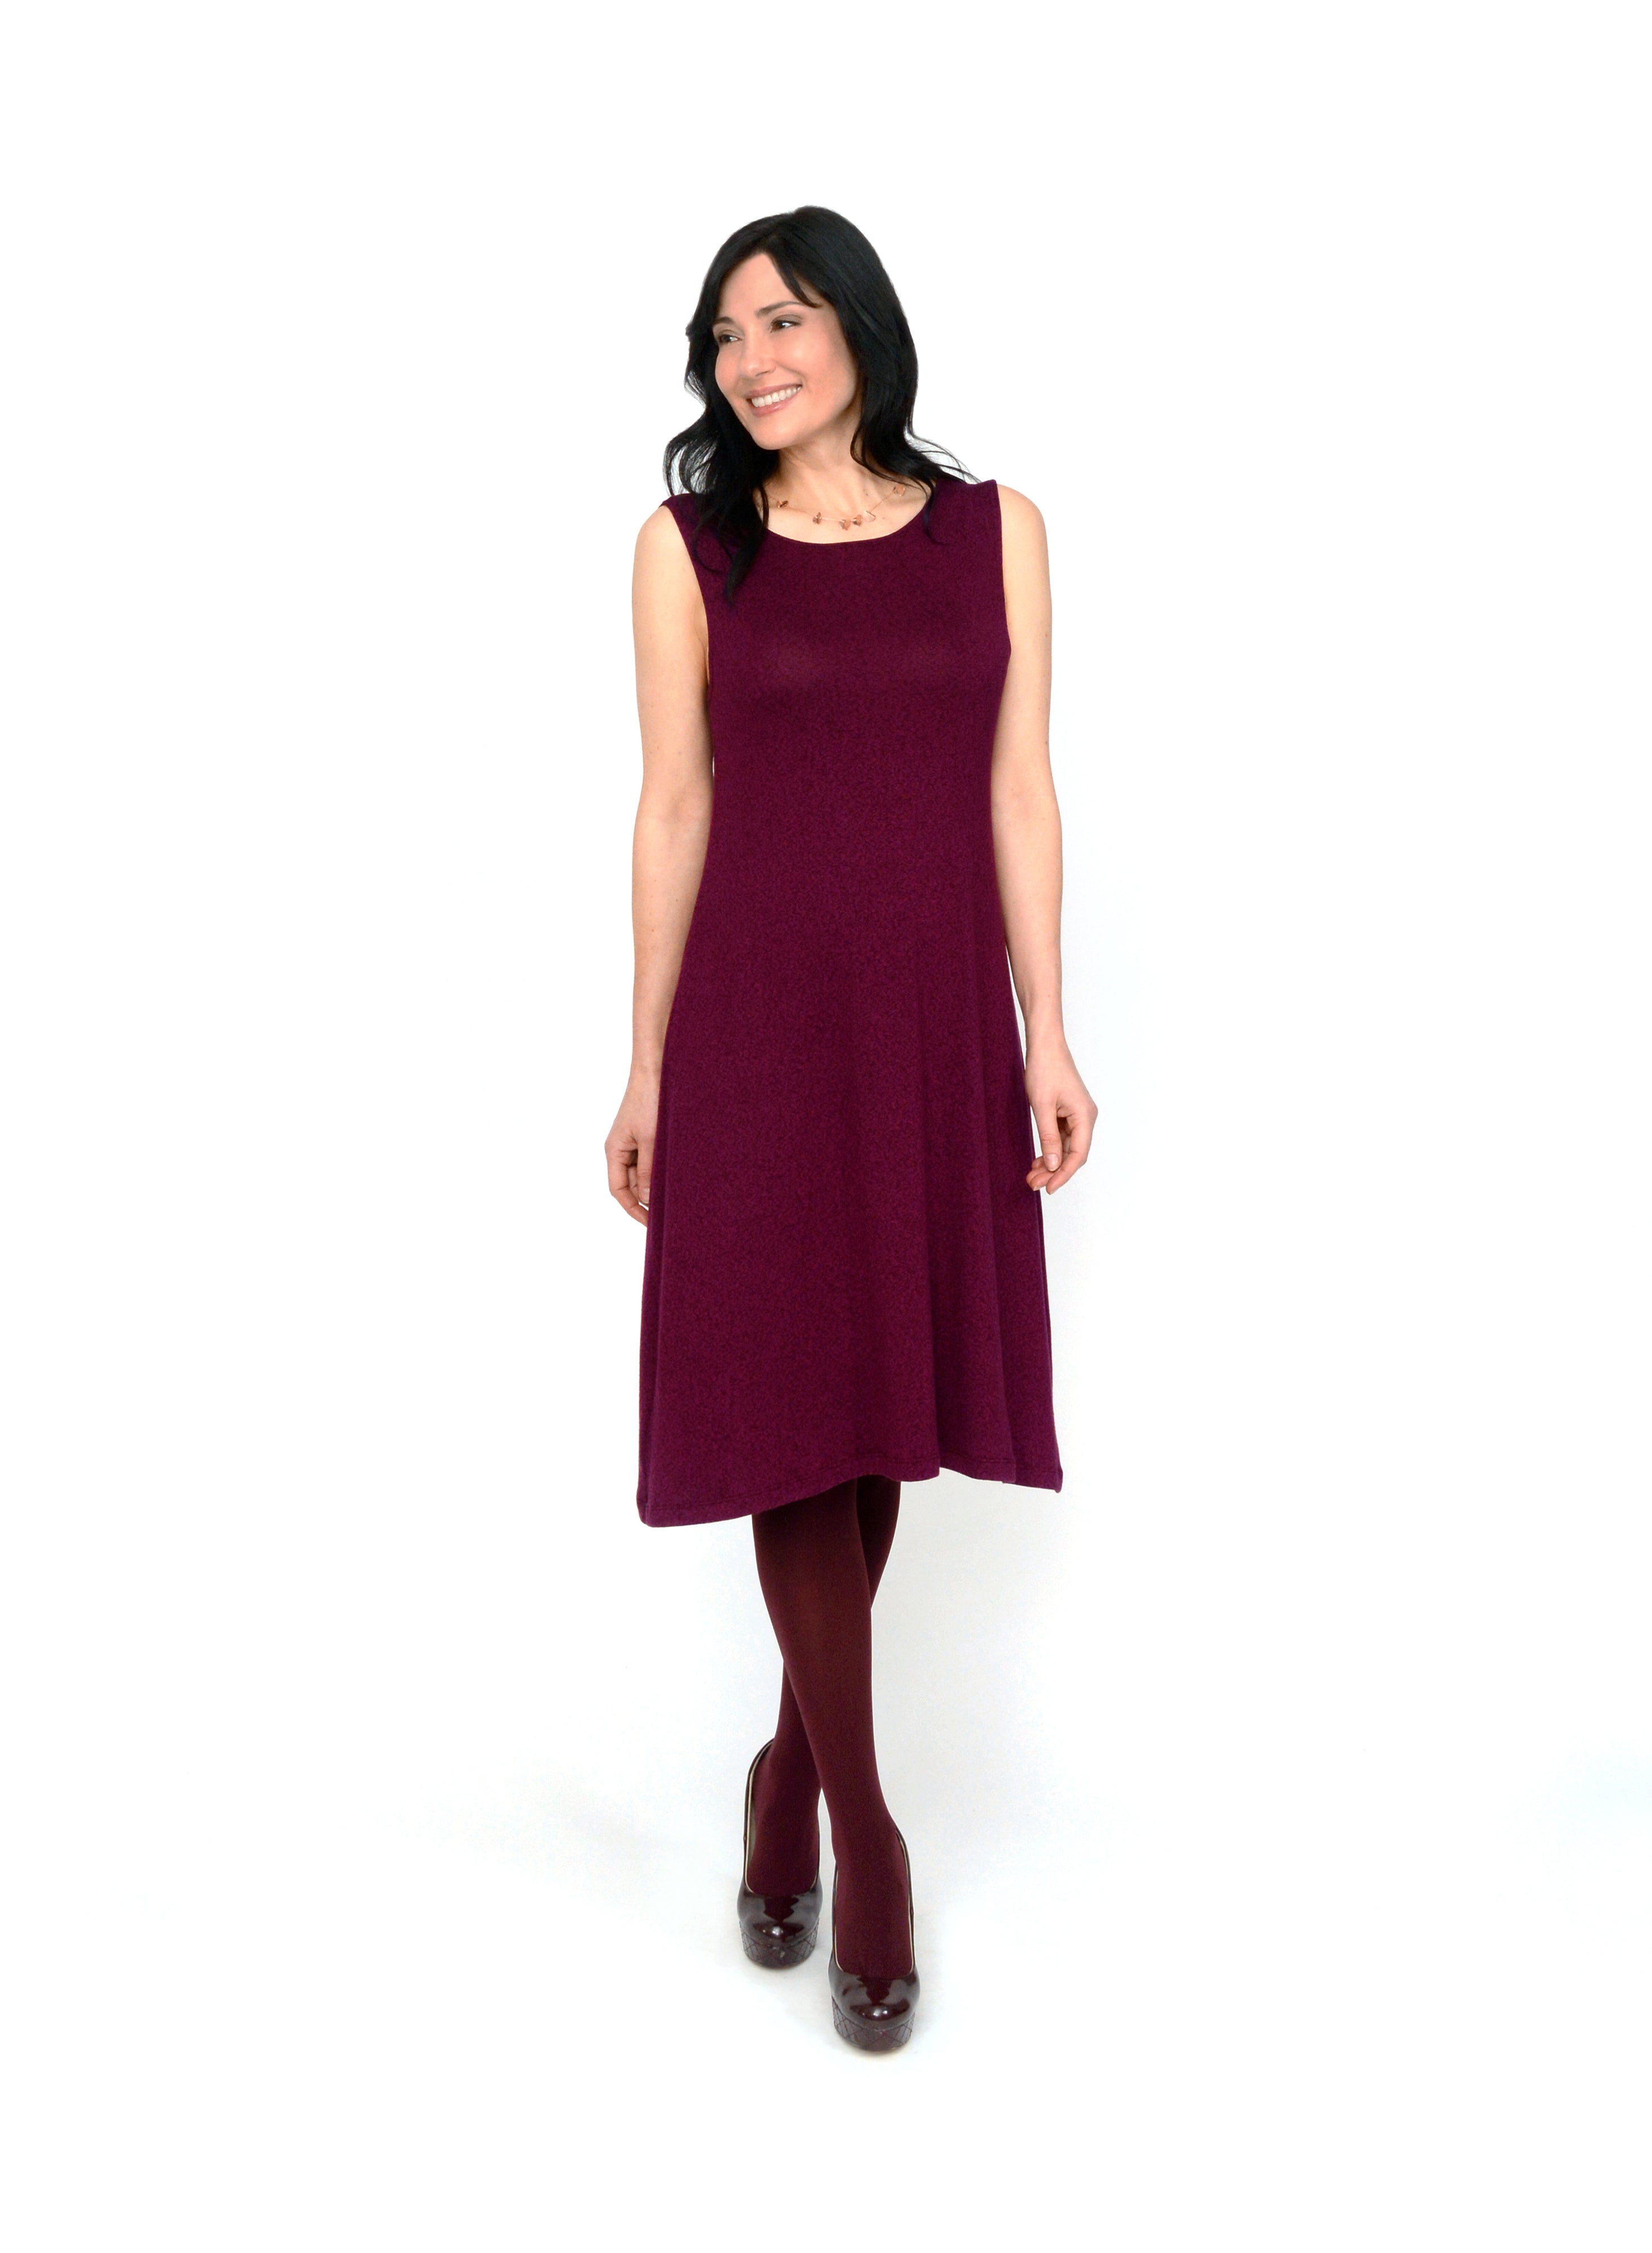 Burgundy reversible neckline tank dress. Two-way neckline showing the boat neck in front. Dress length ends below the knee. Tencel Modal blend lux fabric.